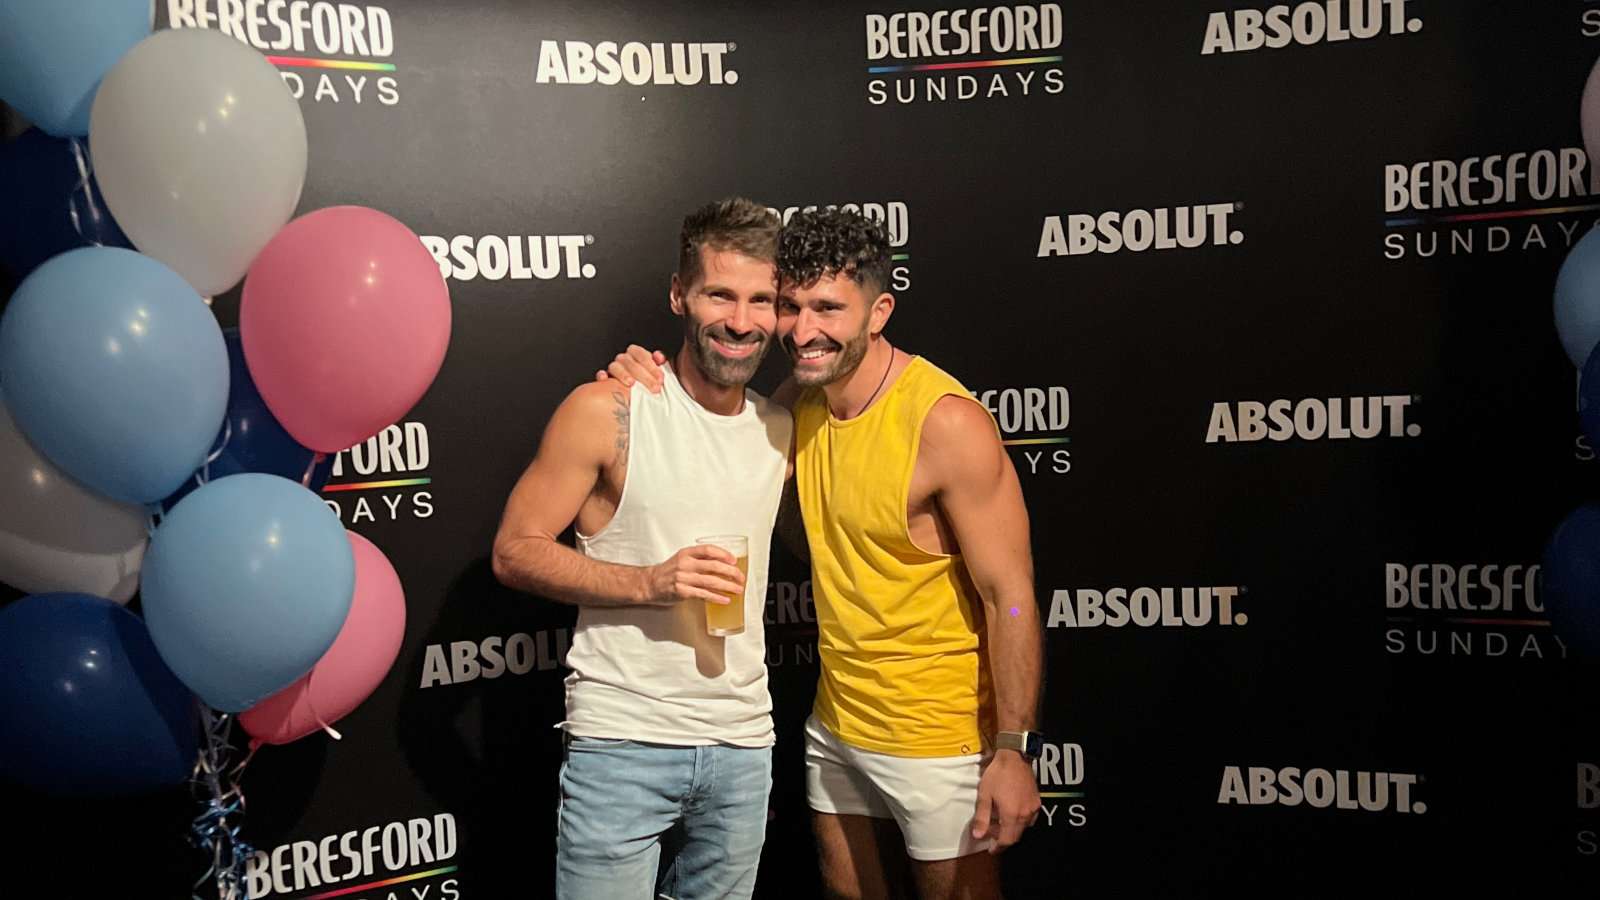 Stefan and Seby posing at The Beresford Sundays gay party in Sydney.